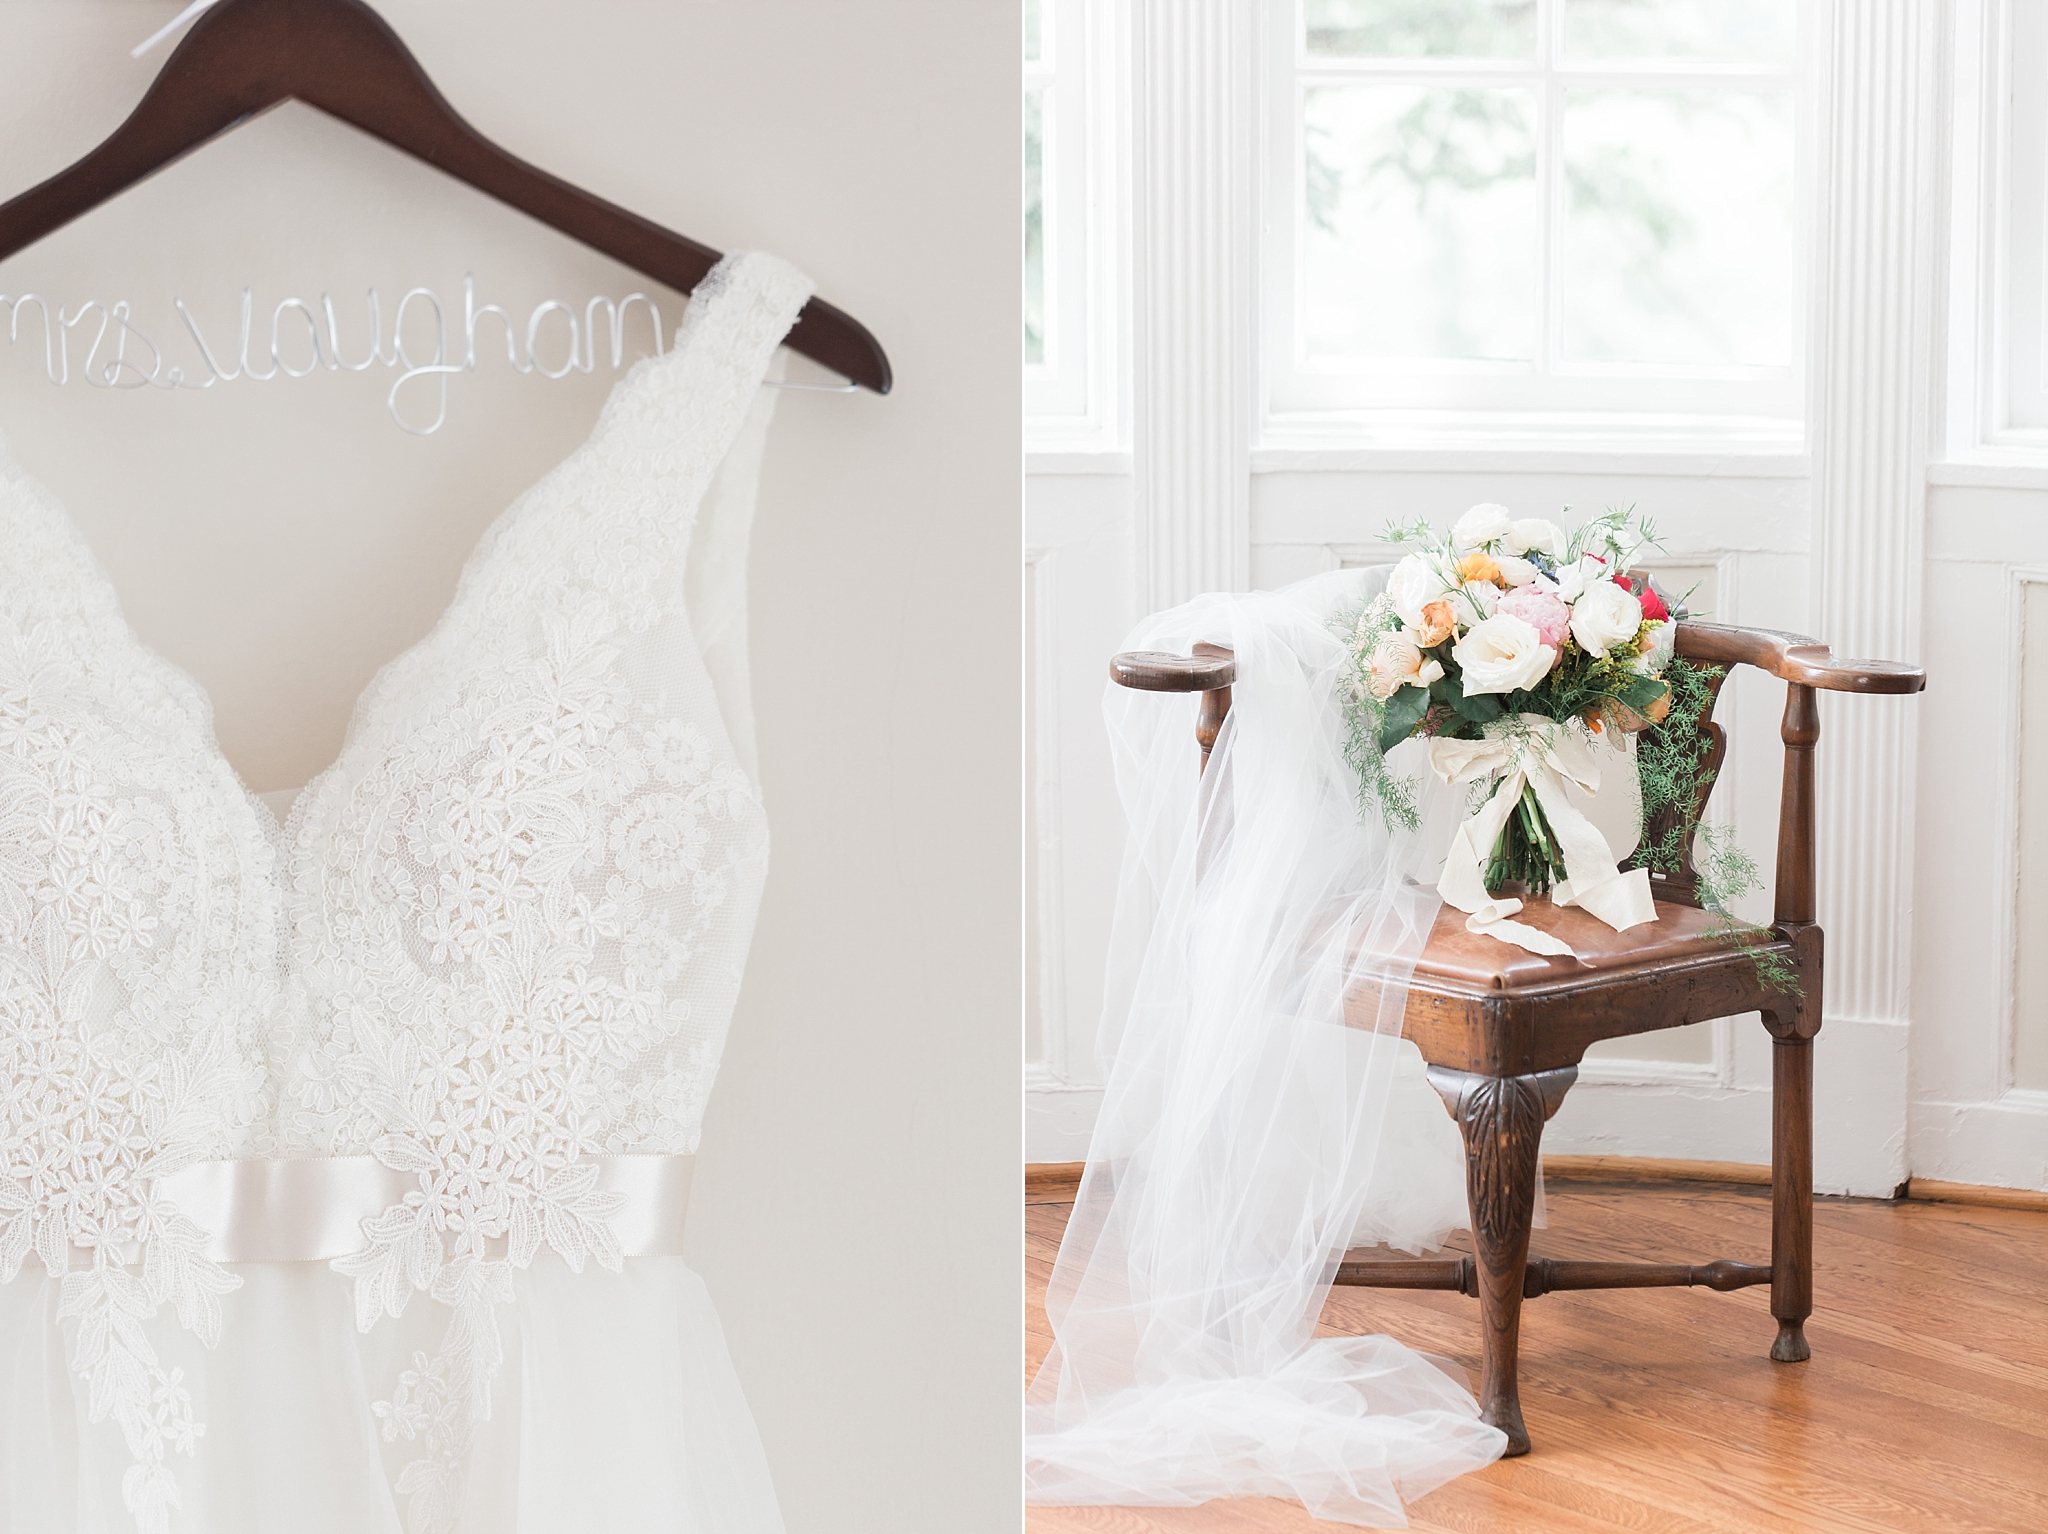 Washington, DC wedding photographer, Alicia Lacey, takes a look back on the best bridal and reception details of 2016.